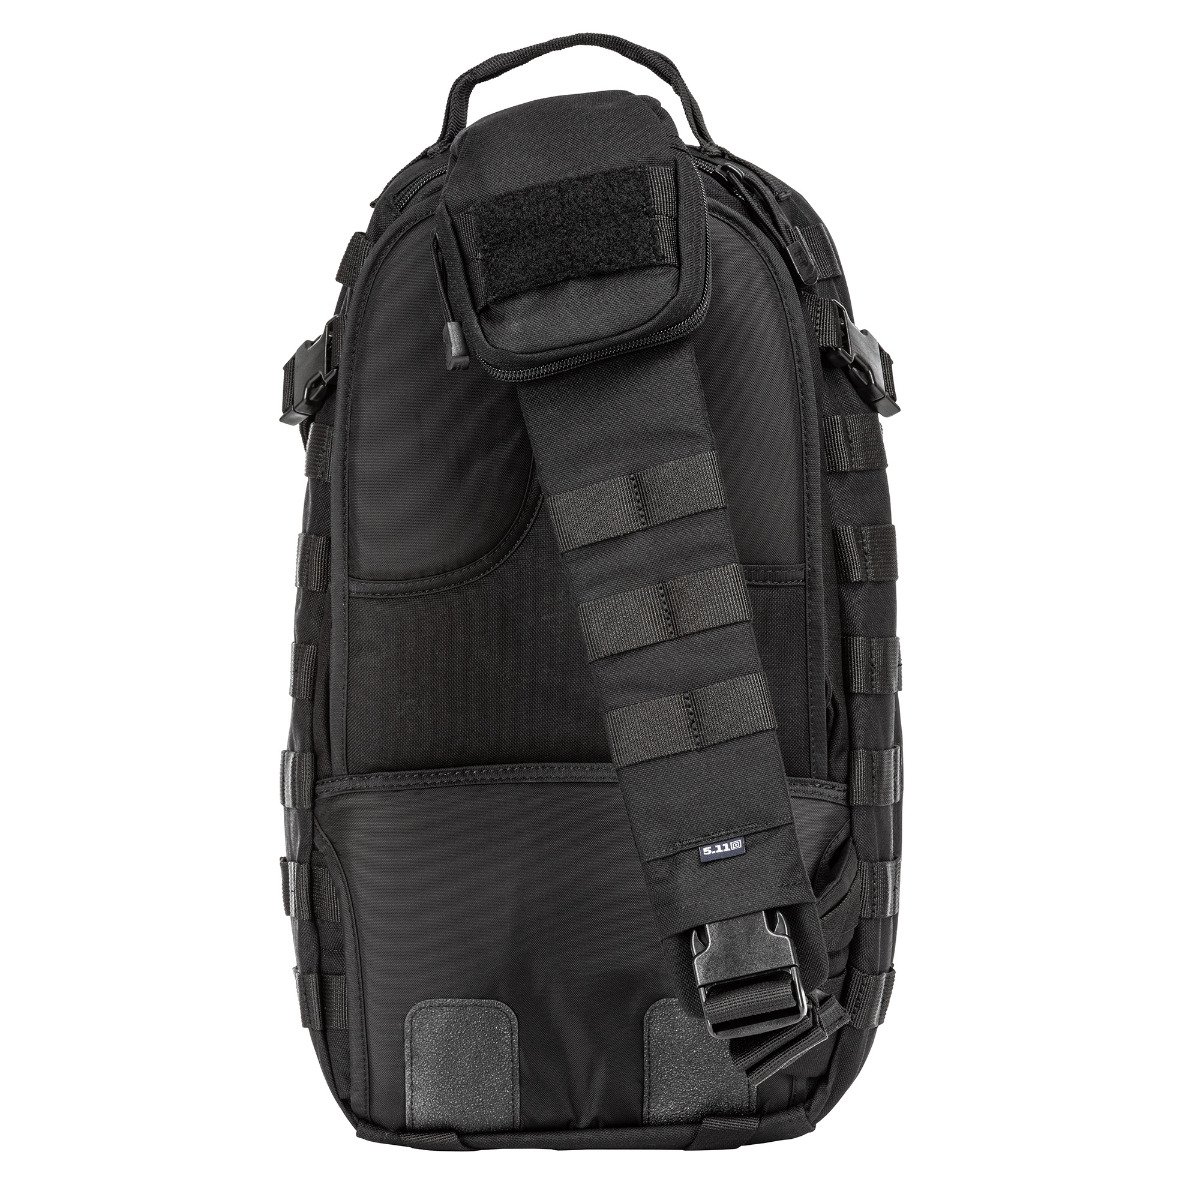 5.11 Work Gear Rush MOAB 10 Pack, Water-Resistant, Customizable Bag, Black, 1 SZ, Style 56964 - image 3 of 6